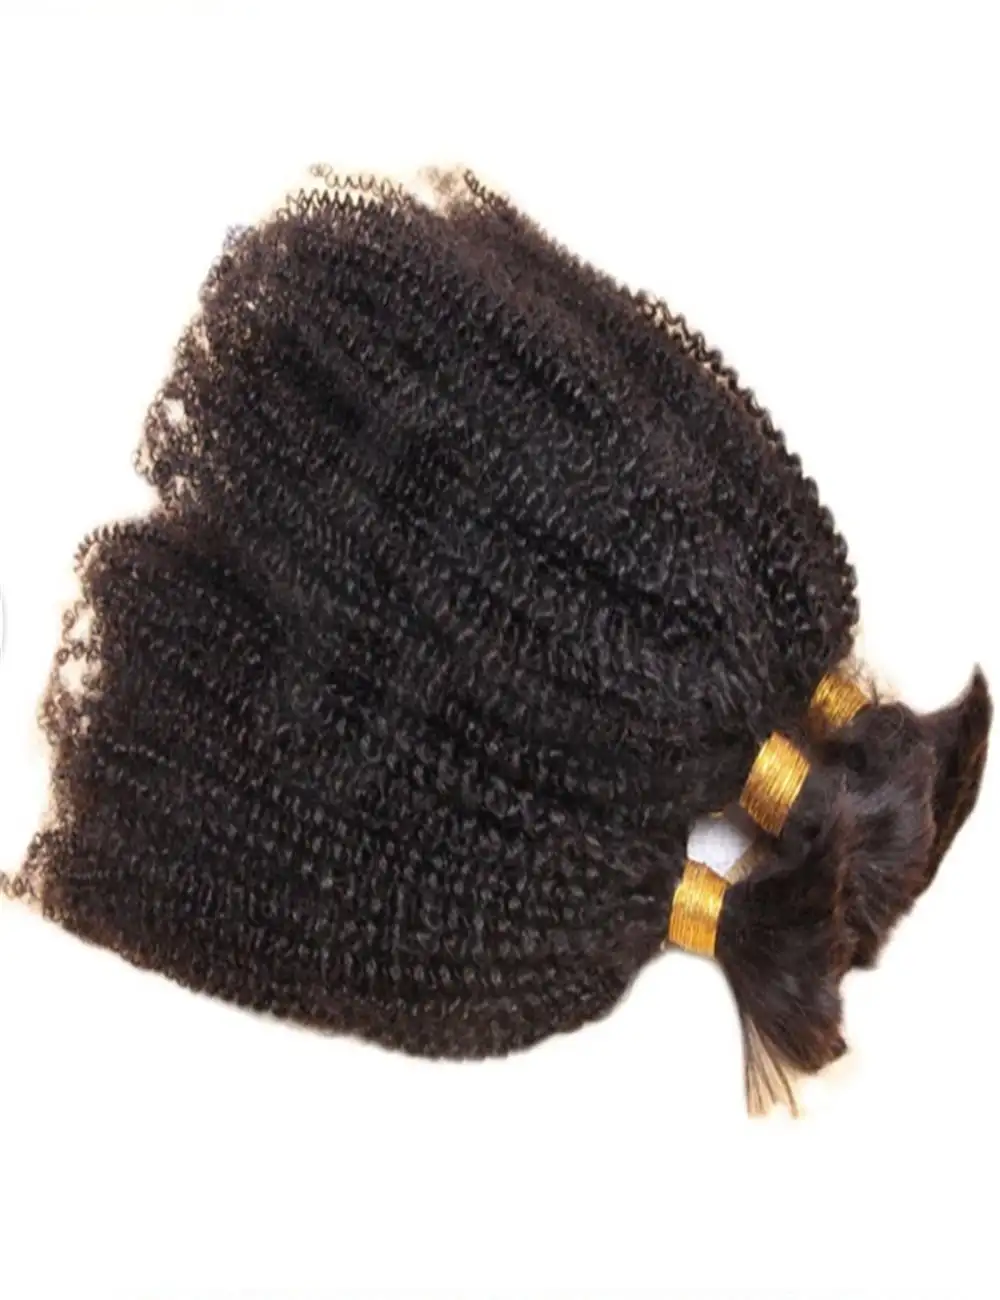 2018 New Fashion Afro Kinky Curly Virgin Brazilian Hair Natural Color Hair Weave For Black Women